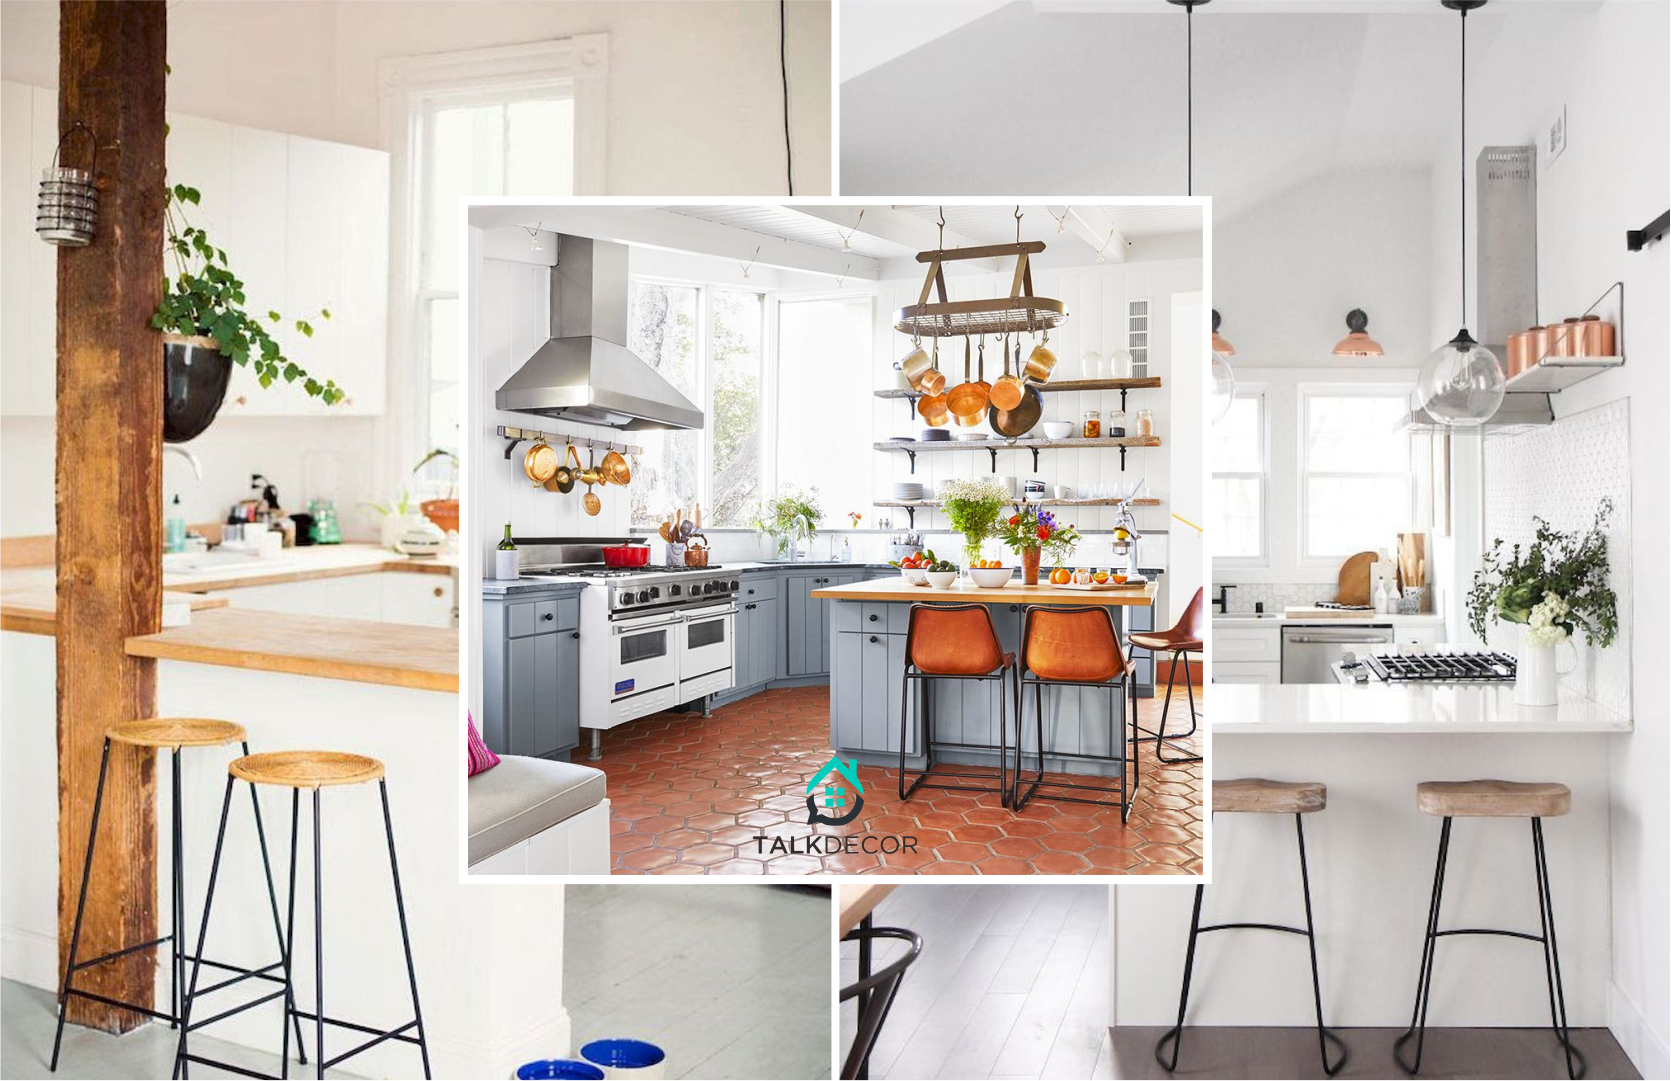 24 Impressive Tiny Kitchen Designs that Maximize the Function and Style ...